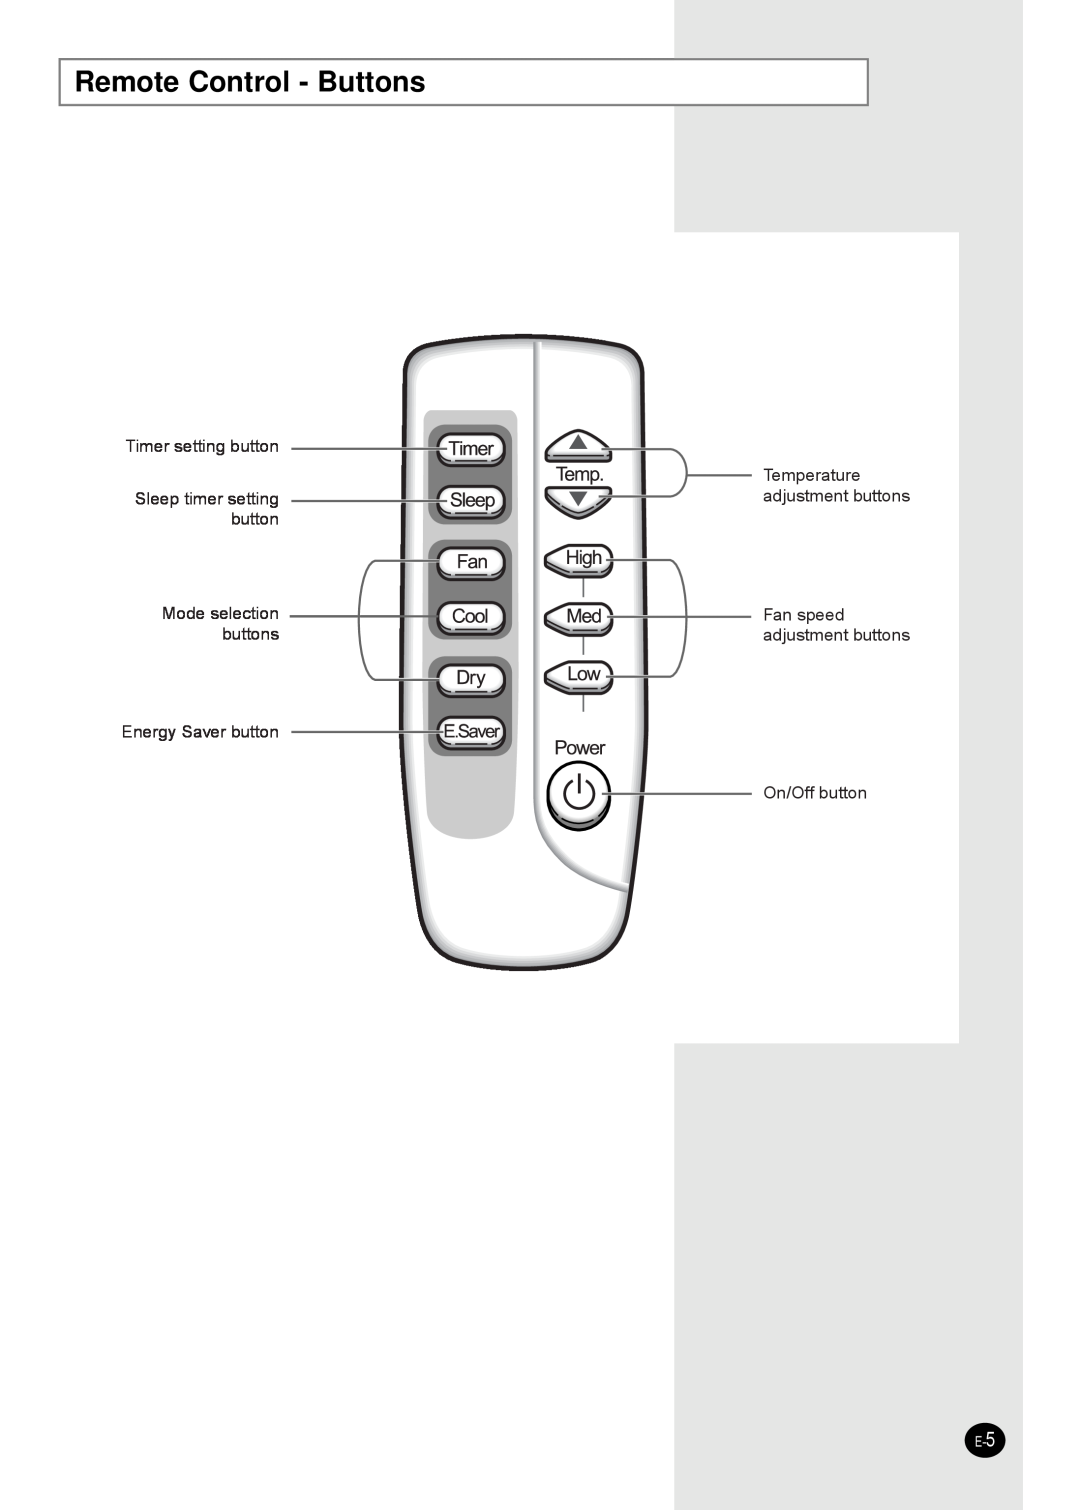 Samsung AW2402B Remote Control - Buttons, Timer setting button Sleep timer setting button, Temperature adjustment buttons 